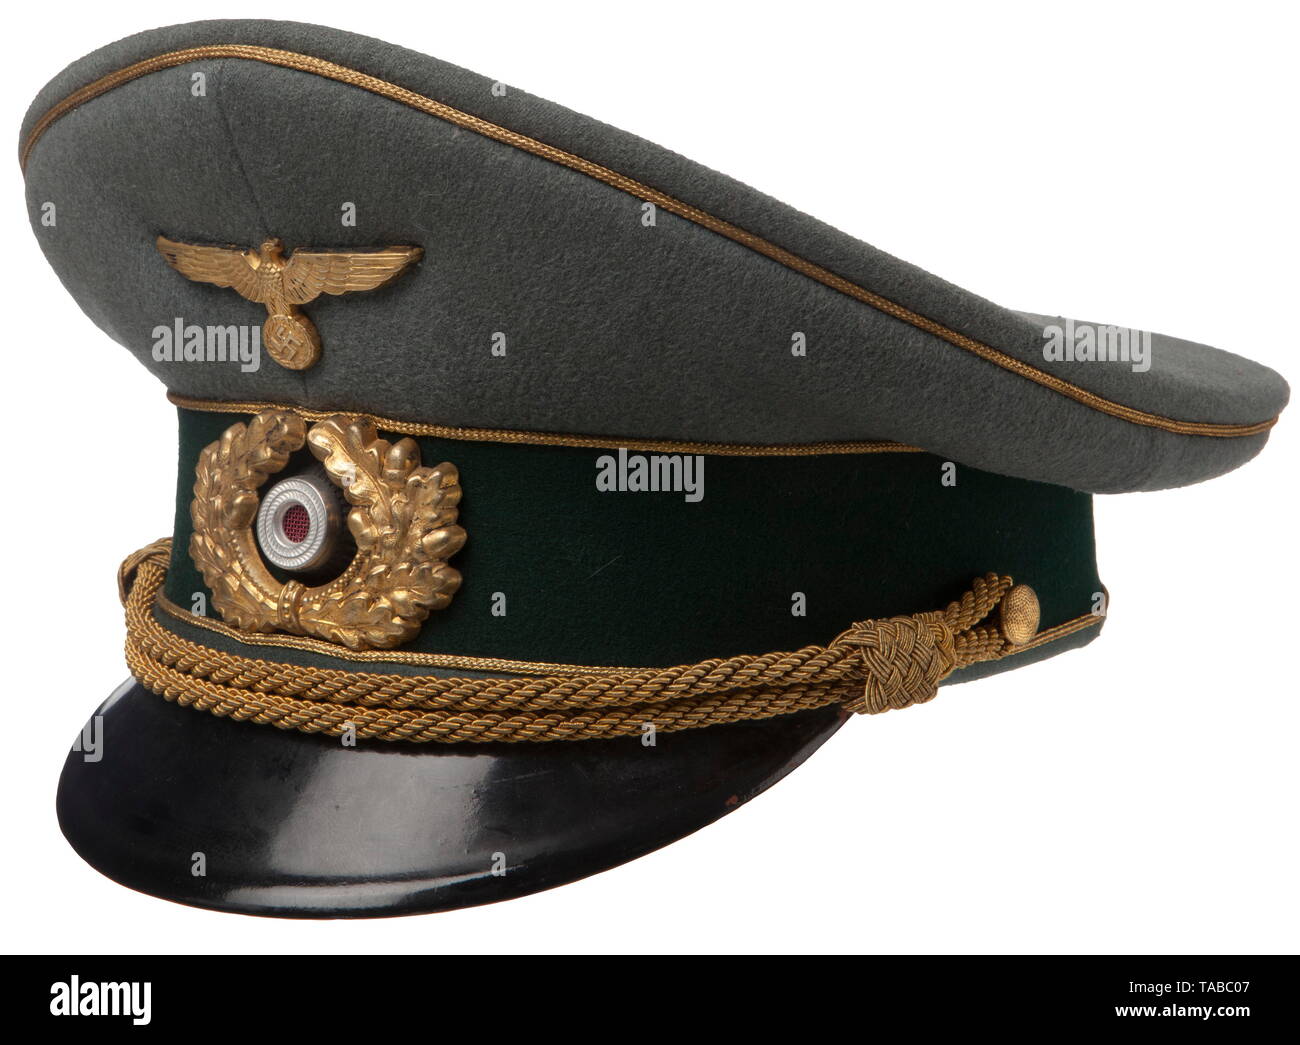 An army general's visor hat Field-grey fine doeskin top with a dark-green wool band, gold wire piping and gold wire chin cord. Gilt finished national emblem and wreath with vented cockade. Black vulcan fiber visor and champagne coloured satin lining with diamond shaped moisture shield imprinted, 'Offizier Kleiderkasse, Erel Sonderklasse Extra'. Dark-brown leather sweatband imprinted with Erel nomenclature. USA-lot, see page 4. historic, historical, army, armies, armed forces, military, militaria, 20th century, Editorial-Use-Only Stock Photo